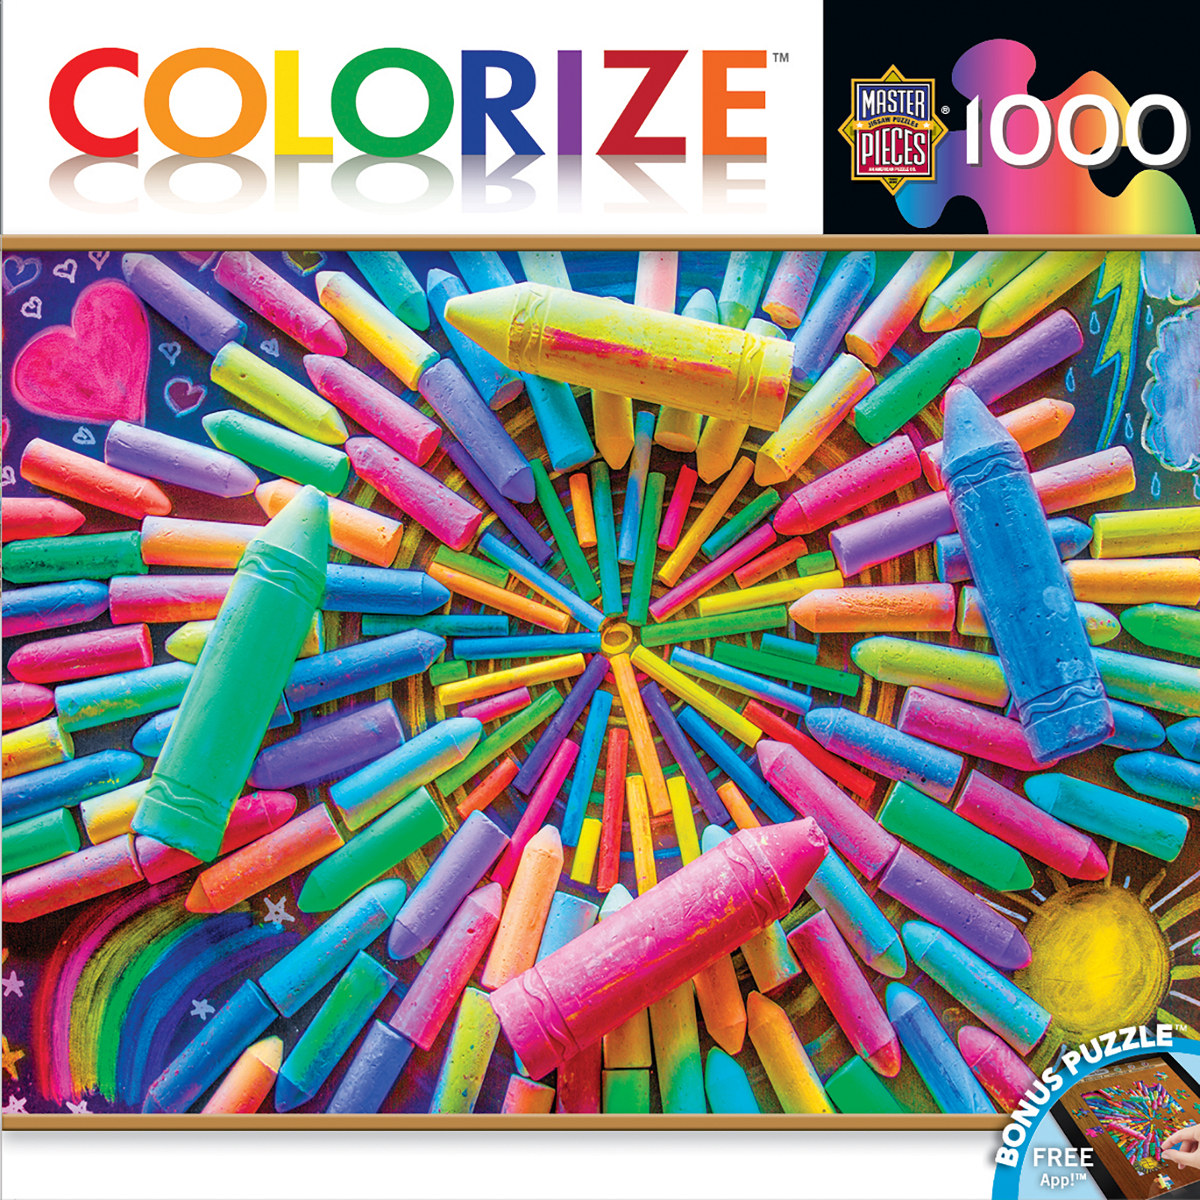 Colors of Childhood (Colorize) Collage Jigsaw Puzzle